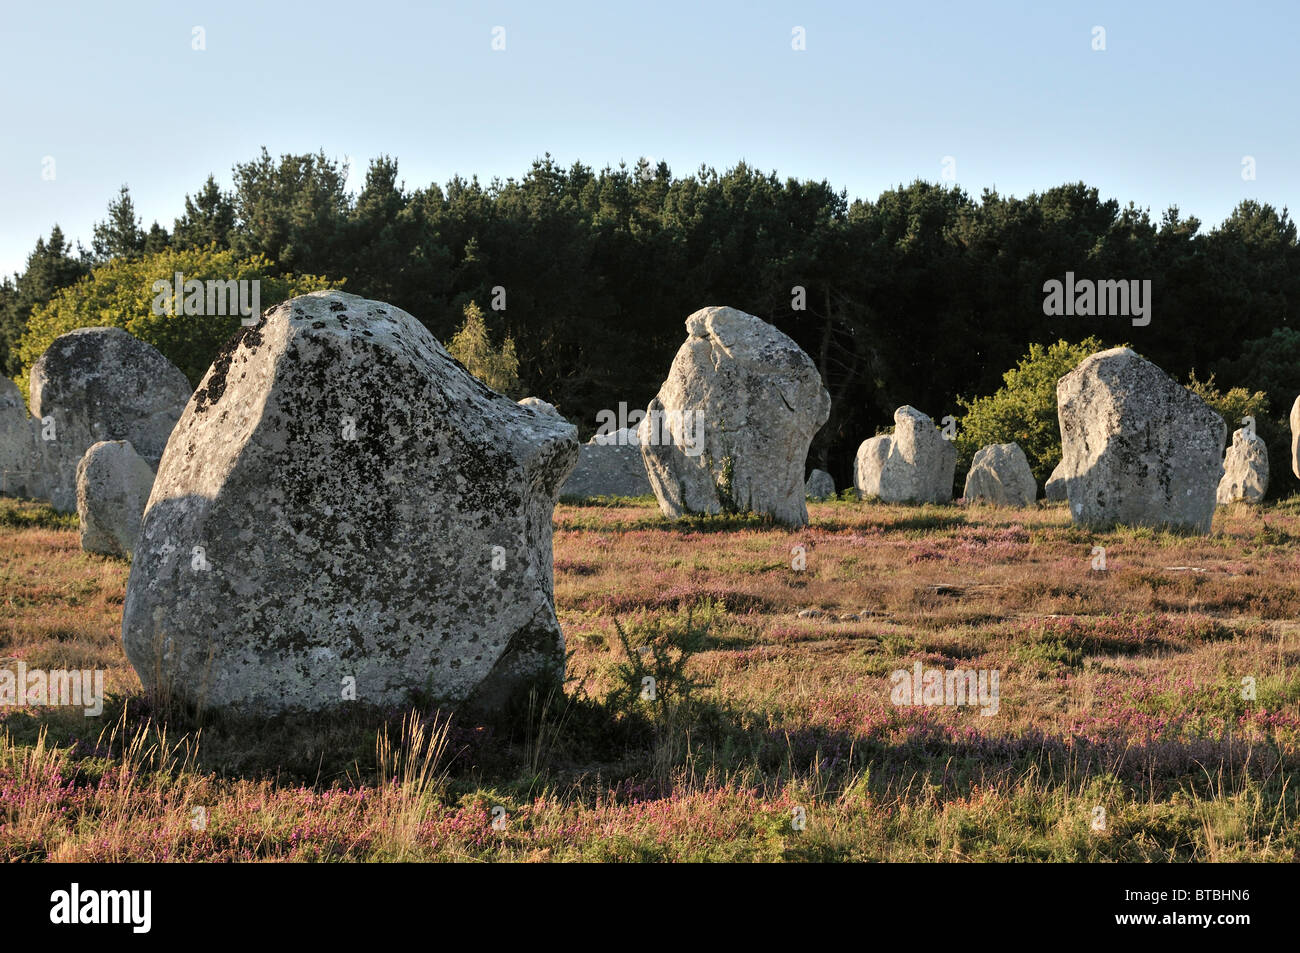 The Standing Stones of Carnac, Brittany, France Stock Photo